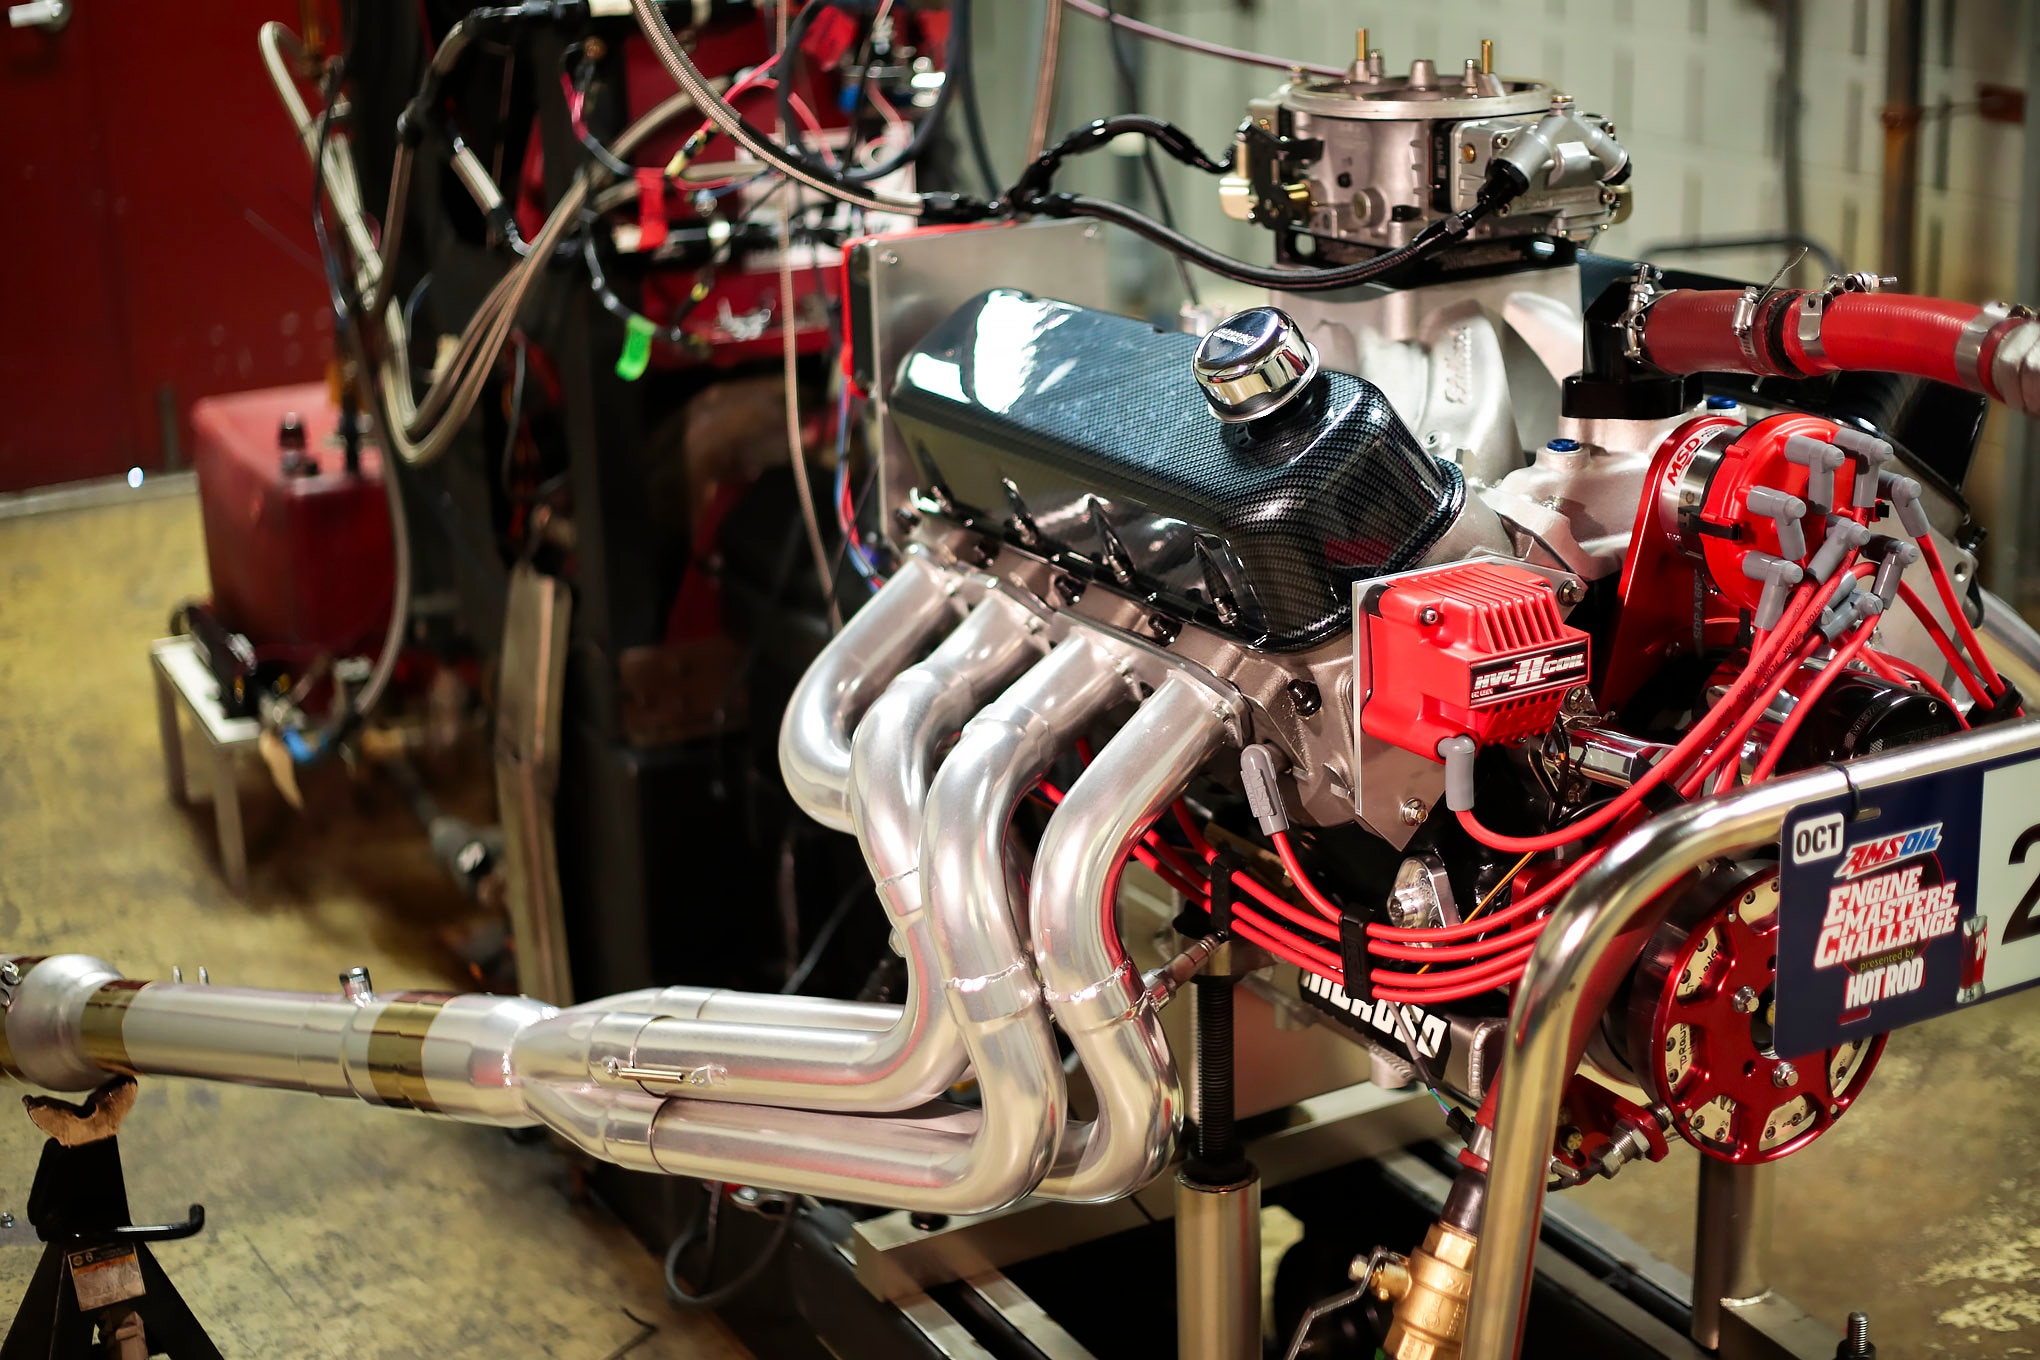 566ci Chevrolet Big-Block at AMSOIL Engine Masters Challenge Hits 800 HP - Hot Rod Network